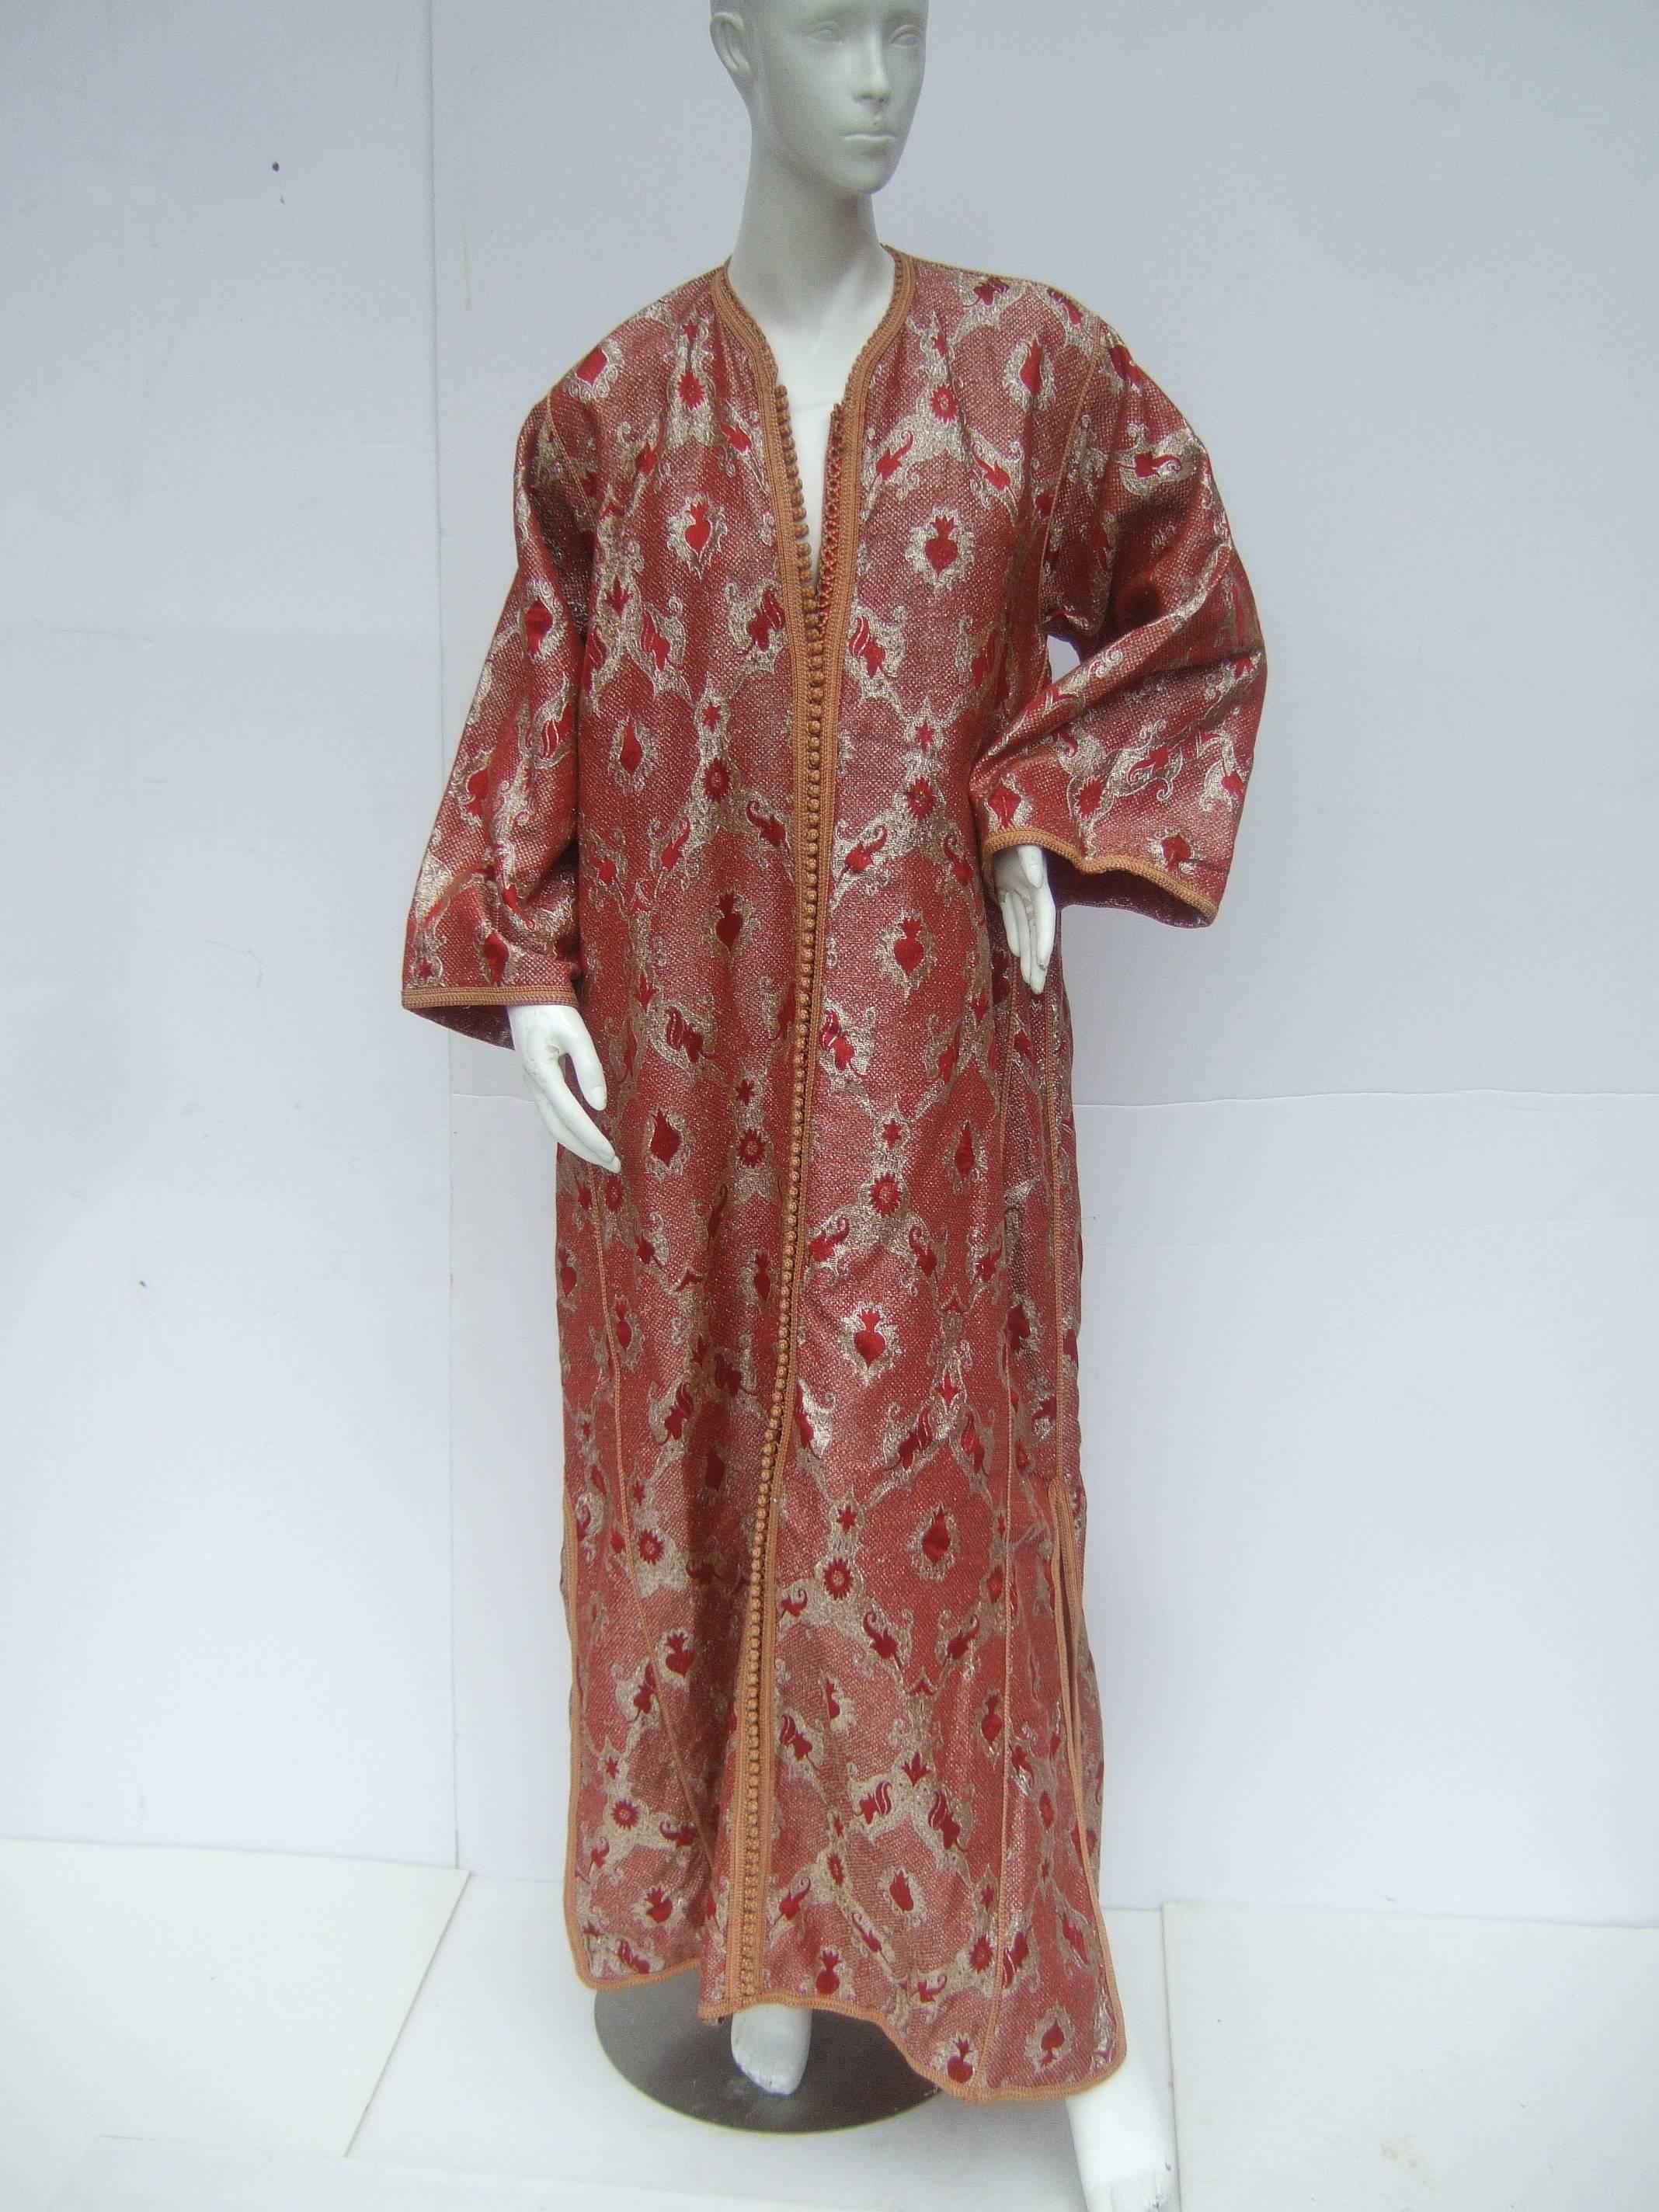 Exotic metallic brocade caftan gown c 1970s
The luxurious caftan is designed with 
brilliant gold metallic combined with 
deep red accent colors 

The front of the elegant caftan gown 
is embellished with a vast row of crochet 
knit buttons